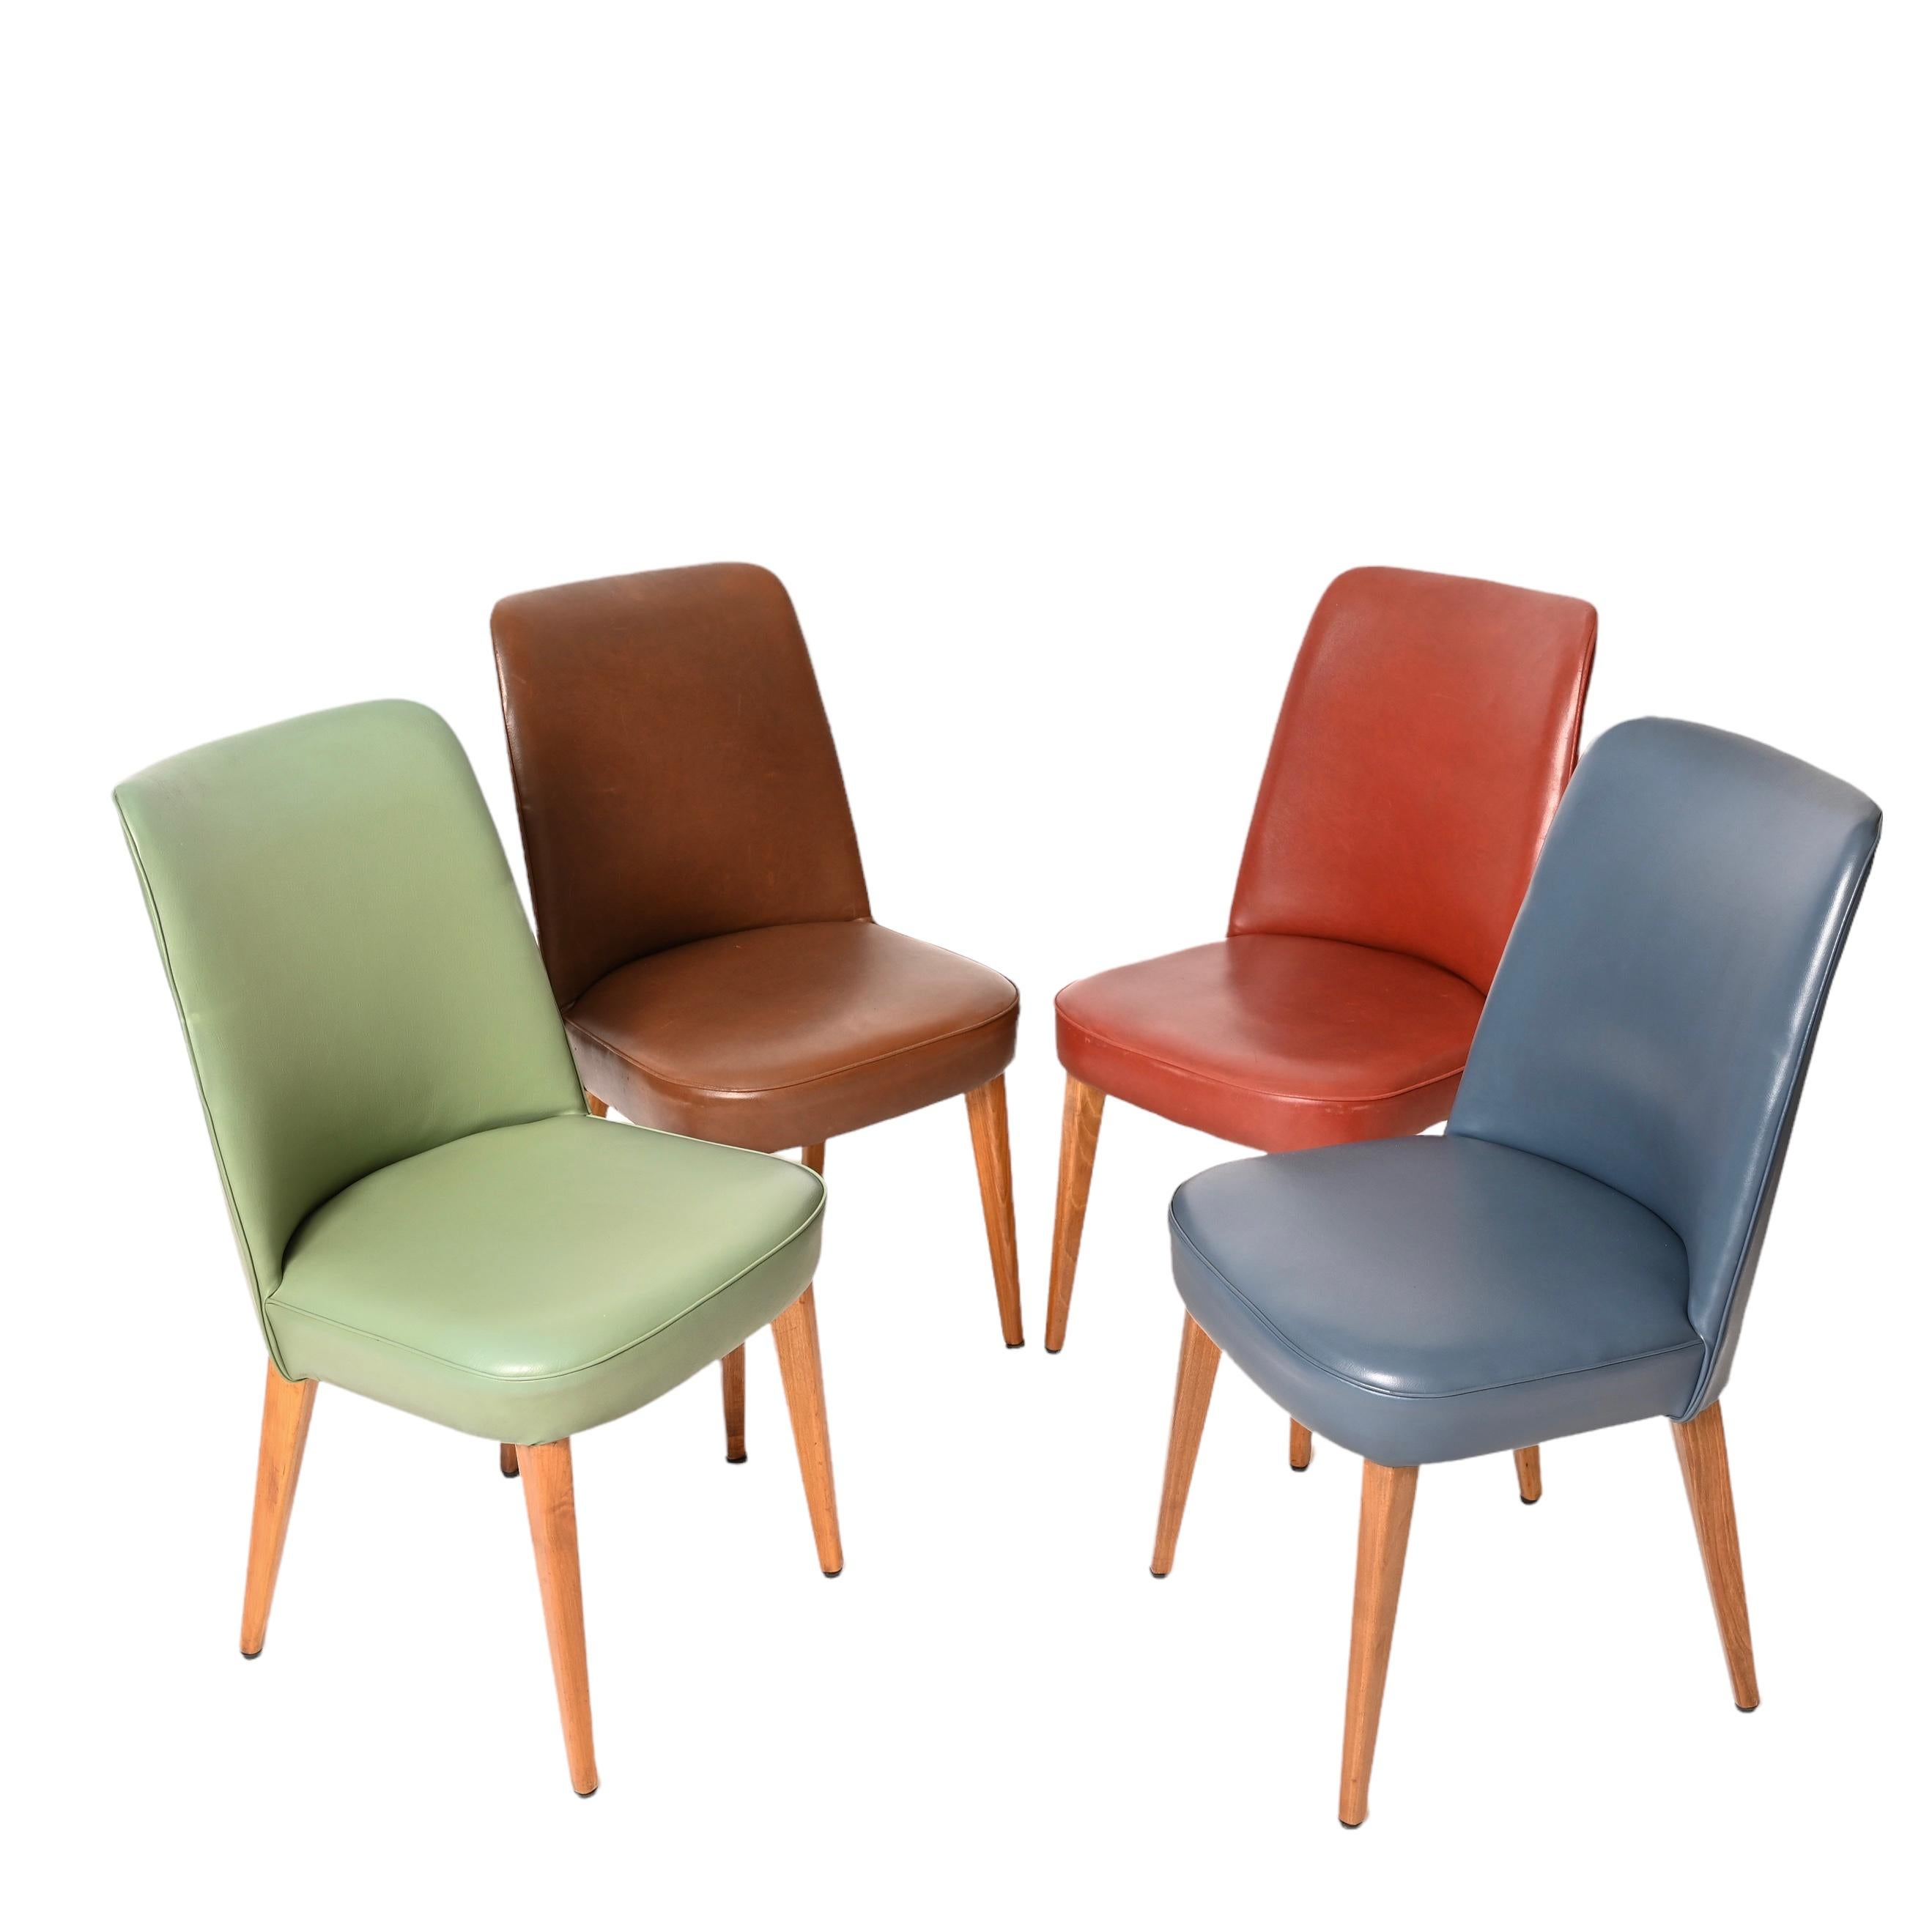 Incredible set of four chairs by Anonima Castelli Bologna Italy.
Padded and covered in the original leather of four different colors that make these chairs unique and really rare.
In fantastic condition, these four high-backed chairs will be a